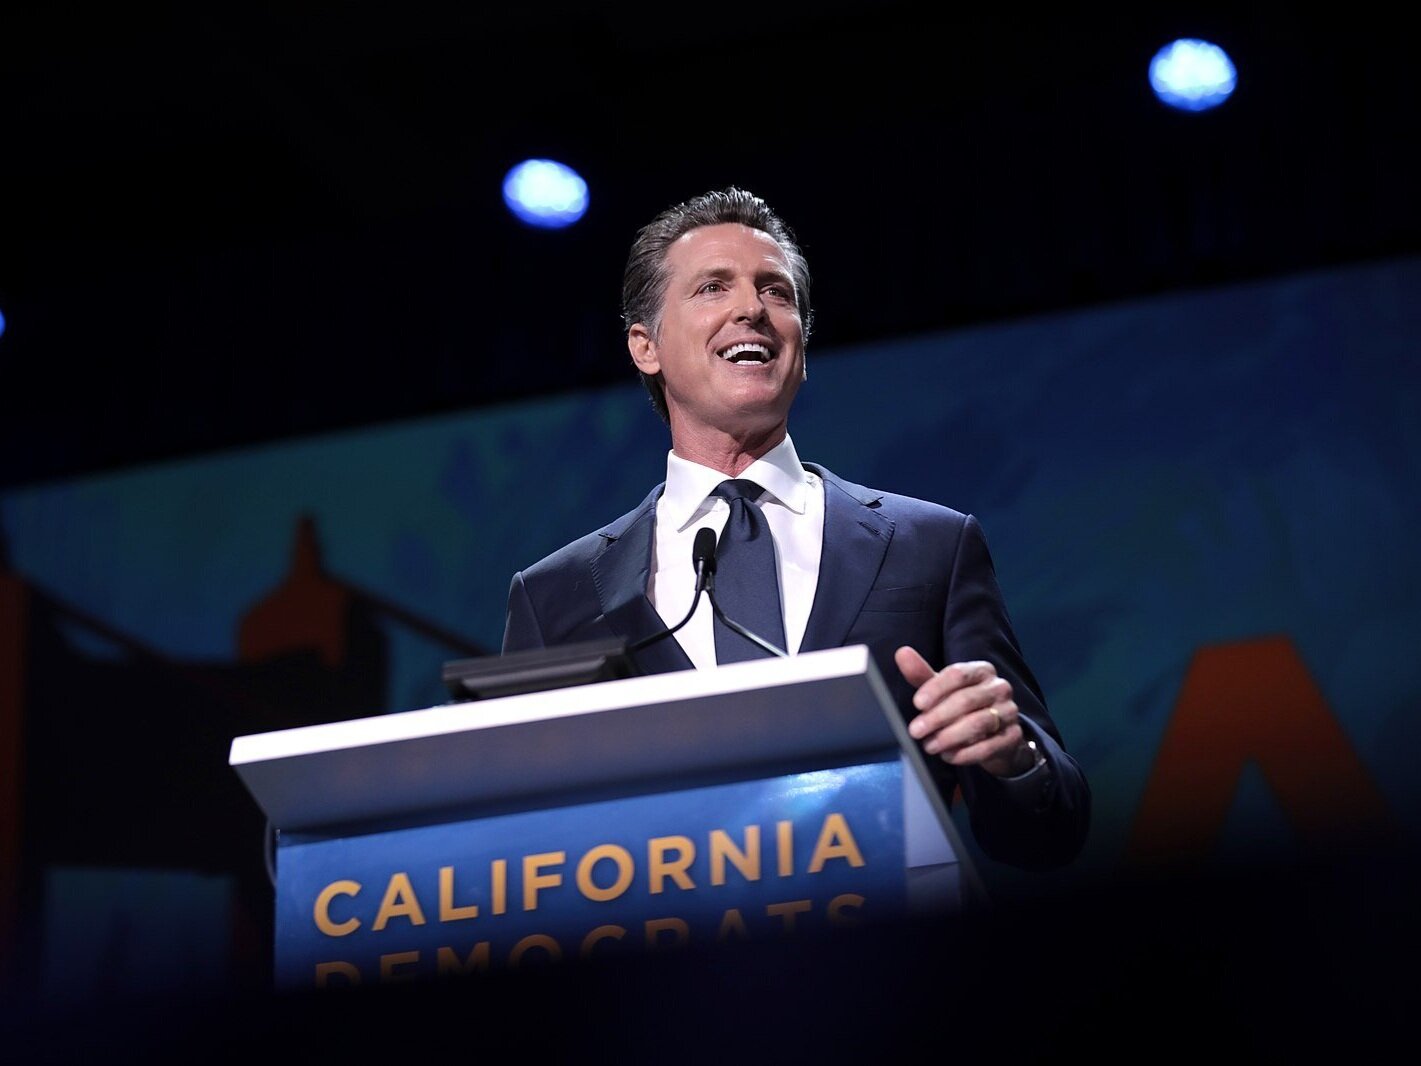 June 1, 2019 – Governor Gavin Newsom speaking with attendees at the 2019 California Democratic Party State Convention at the George R. Moscone Convention Center in San Francisco, California. (Photo by Gage Skidmore | Wikimedia Commons)